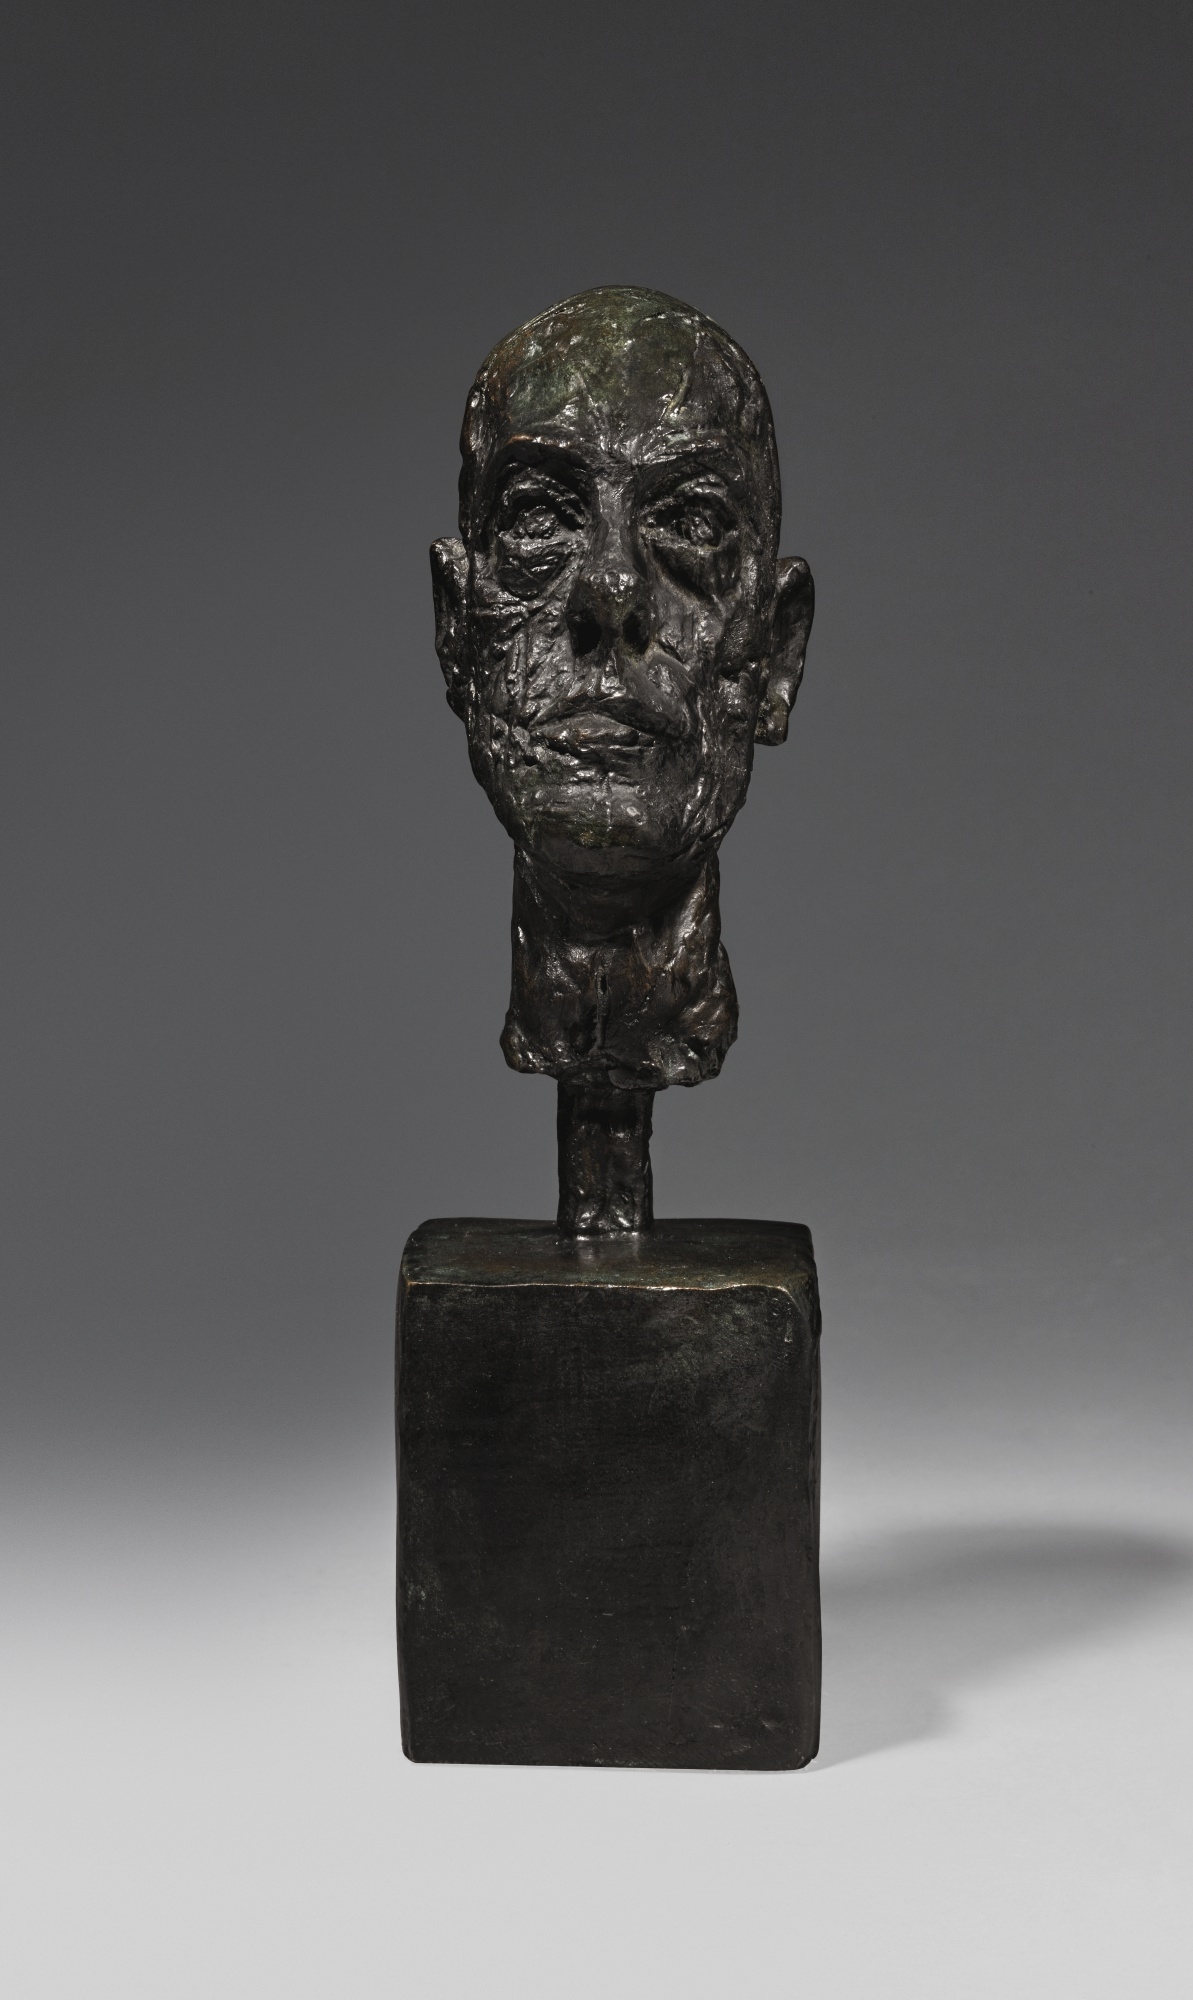 DIEGO (TÊTE SUR SOCLE CUBIQUE) by Alberto Giacometti, conceived 1958, cast 1960